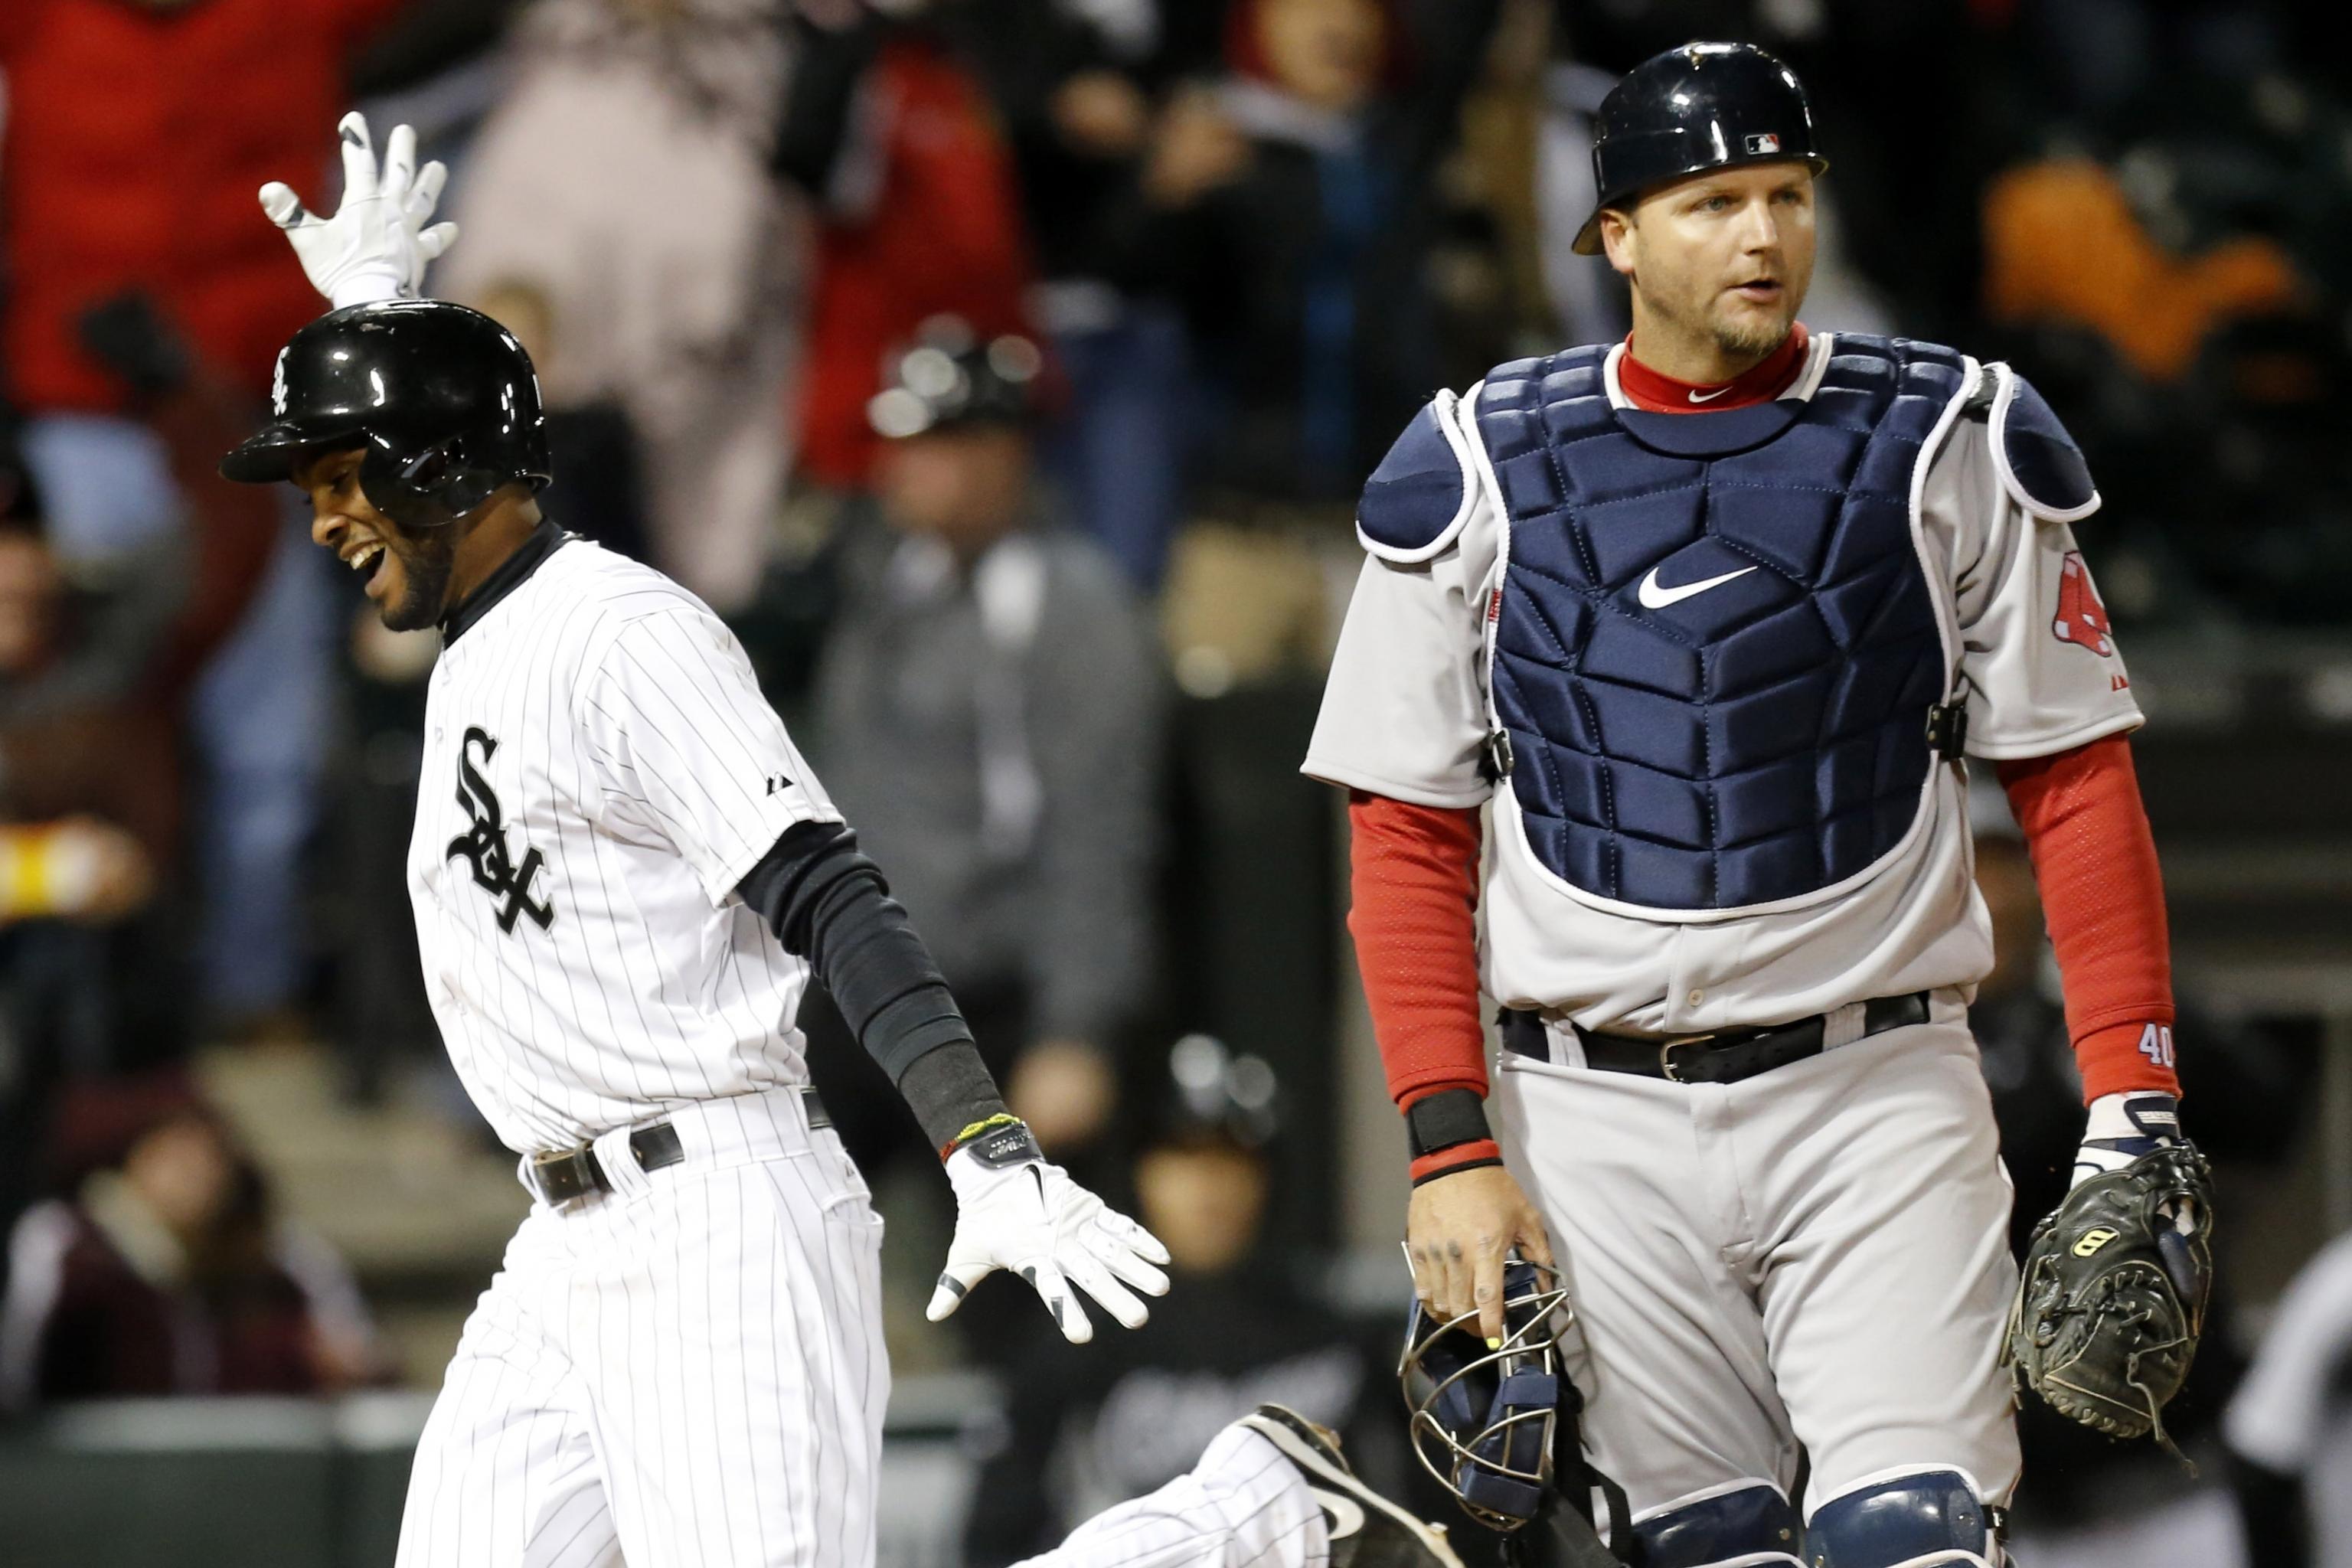 Pierzynski's run with Sox could be nearing end